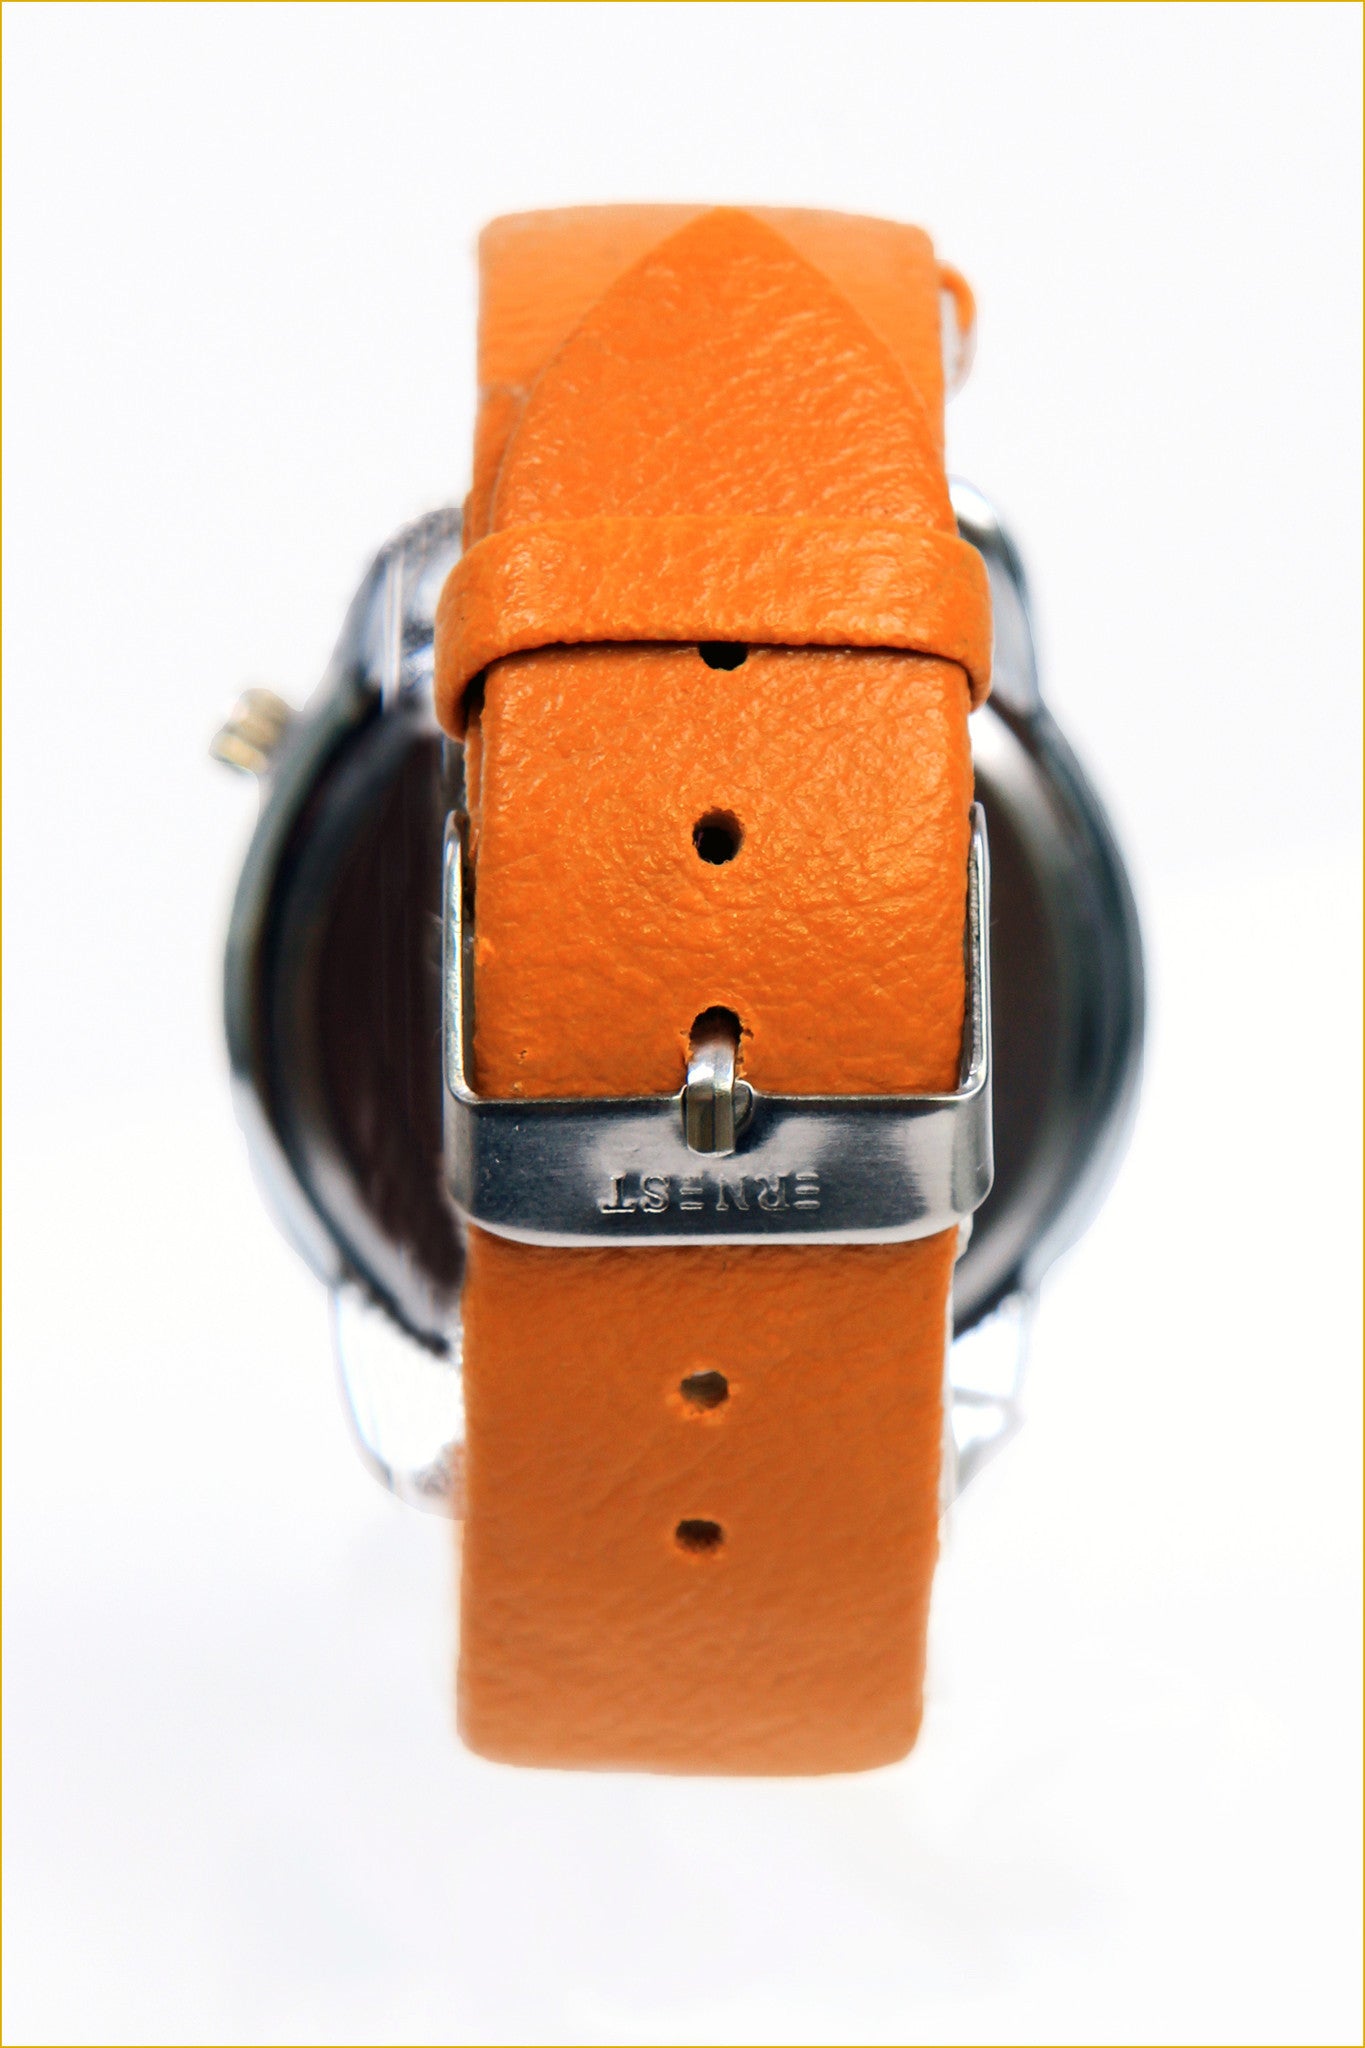 Round Face Analogue Strap Watch